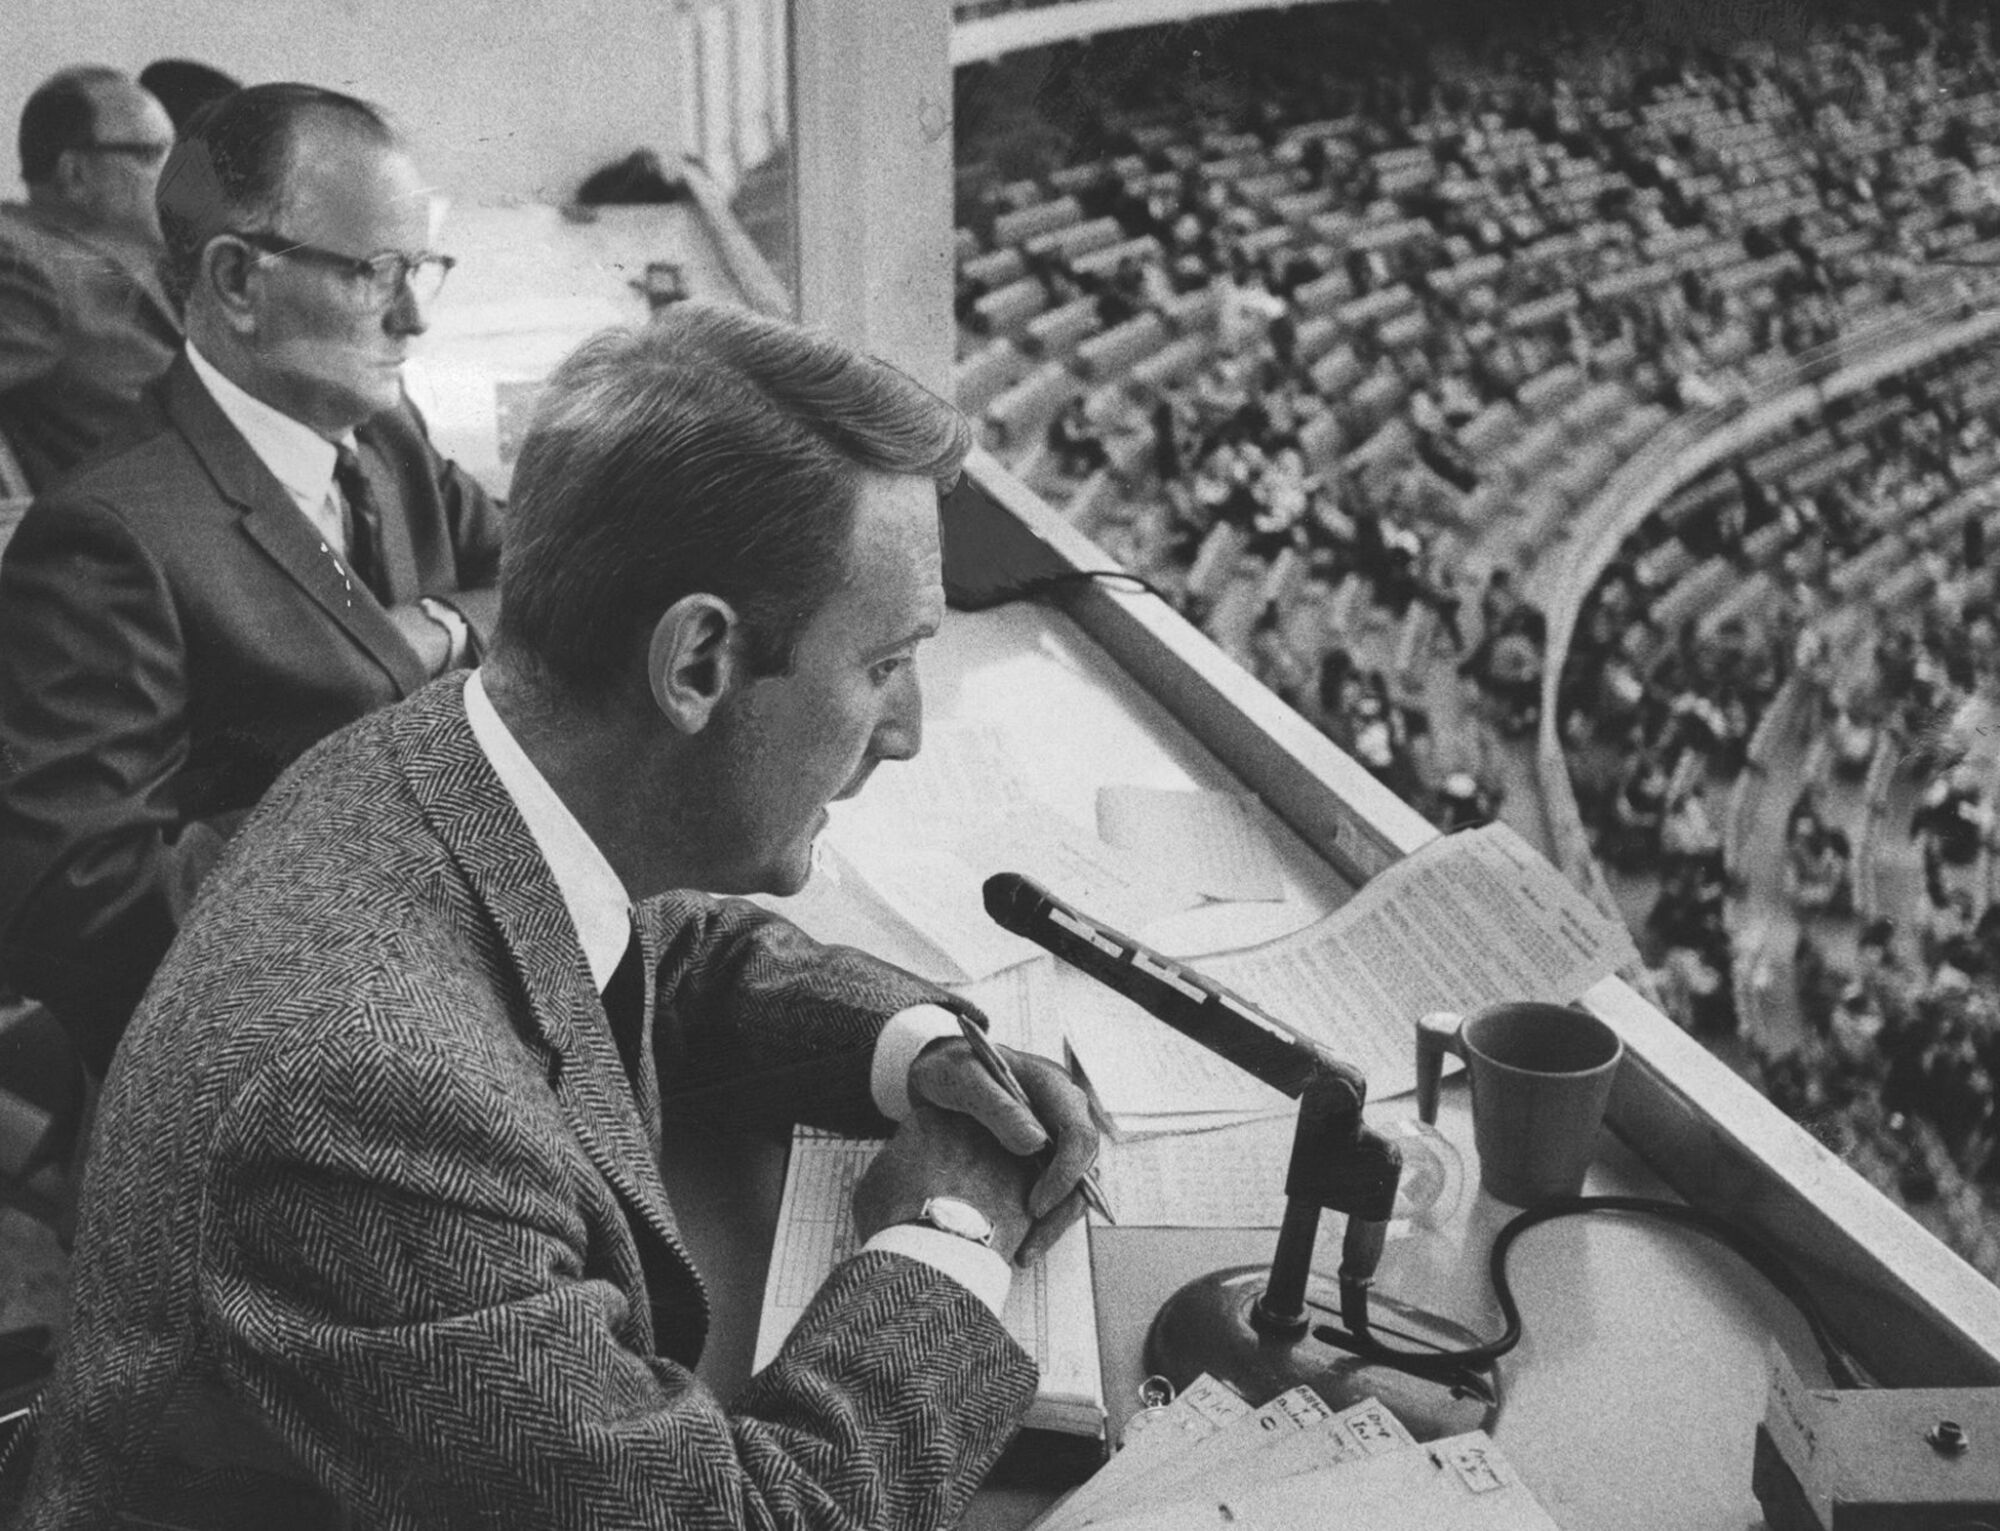 Vin Scully calls a Dodgers game in 1967. His soothing banter was likened to a warm breeze.